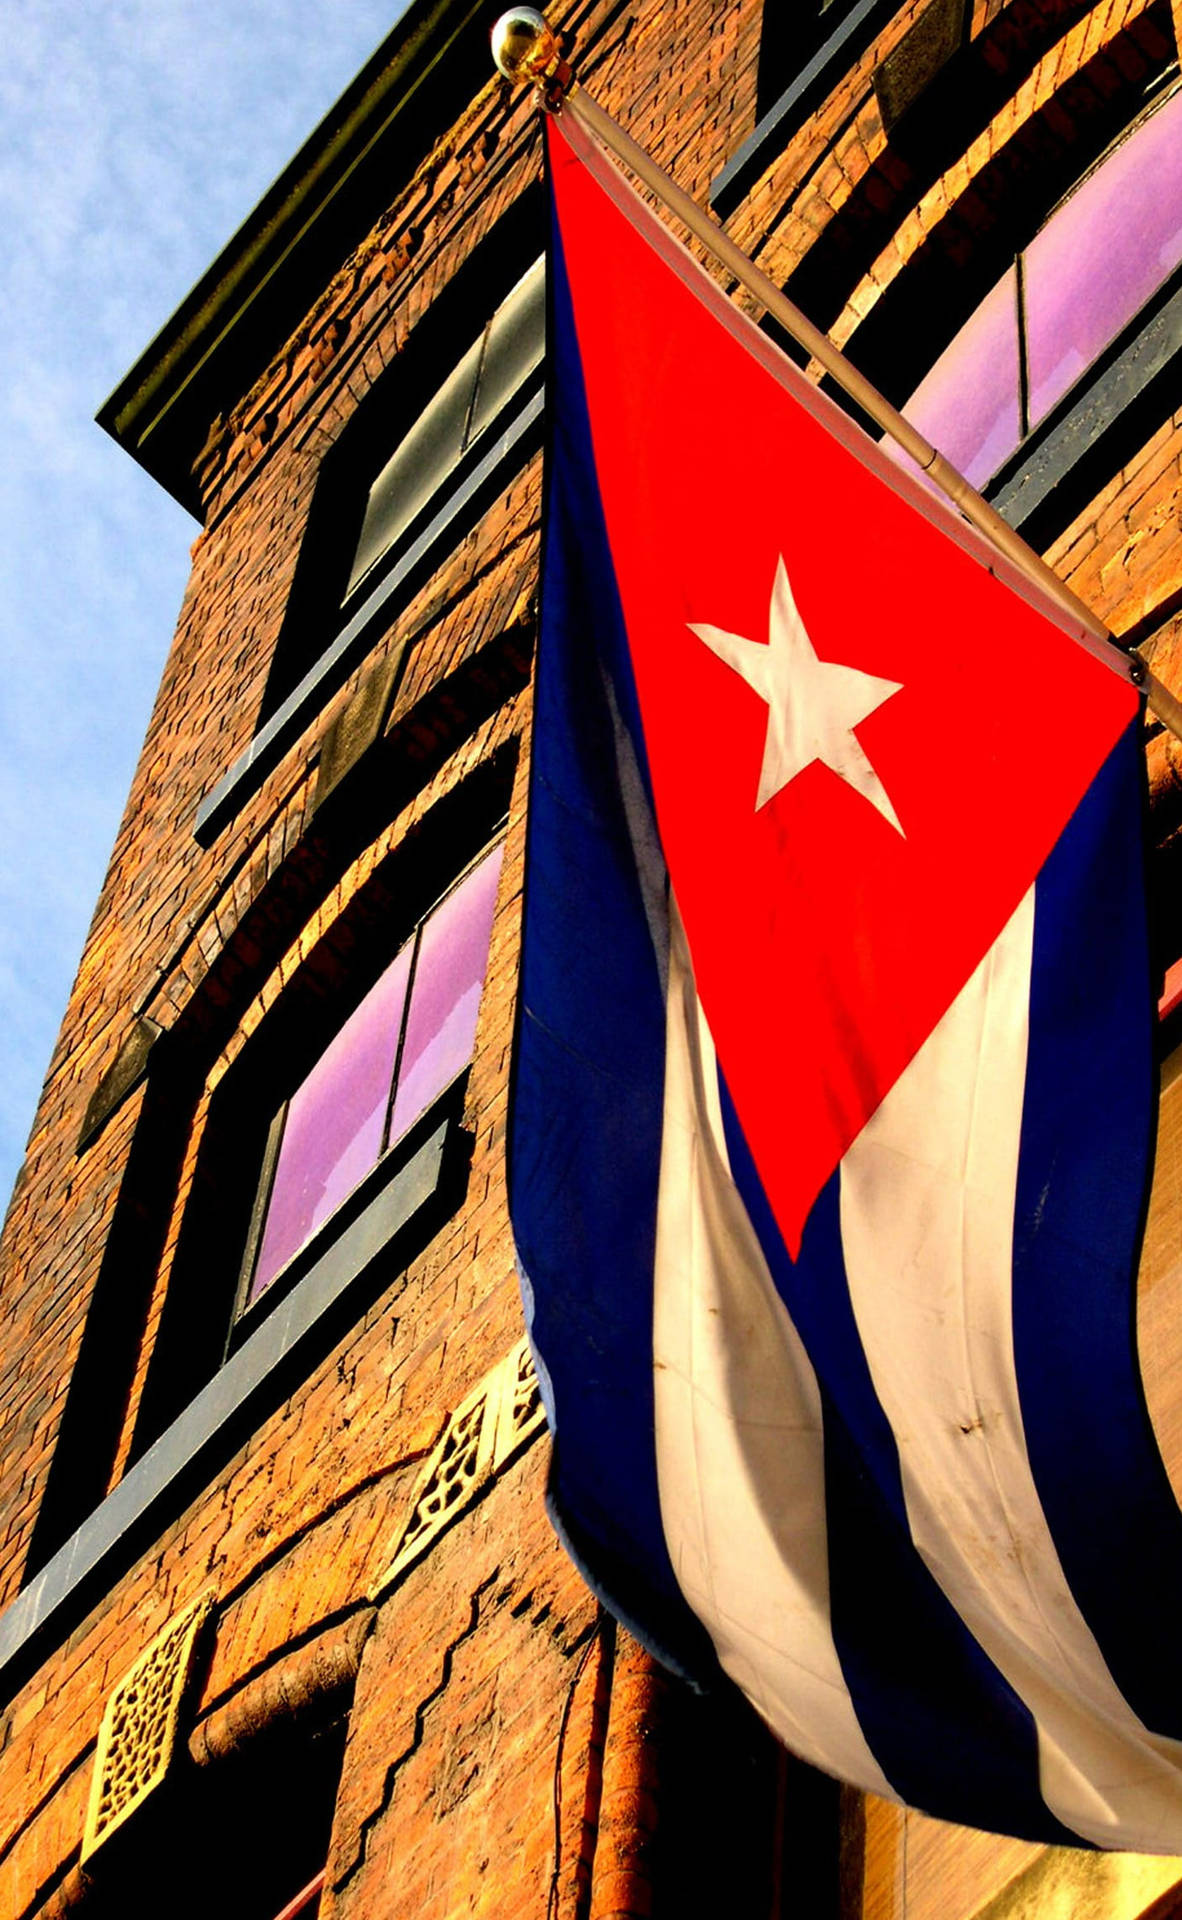 The Cuban Flag Proudly Displayed Outside A Building. Background